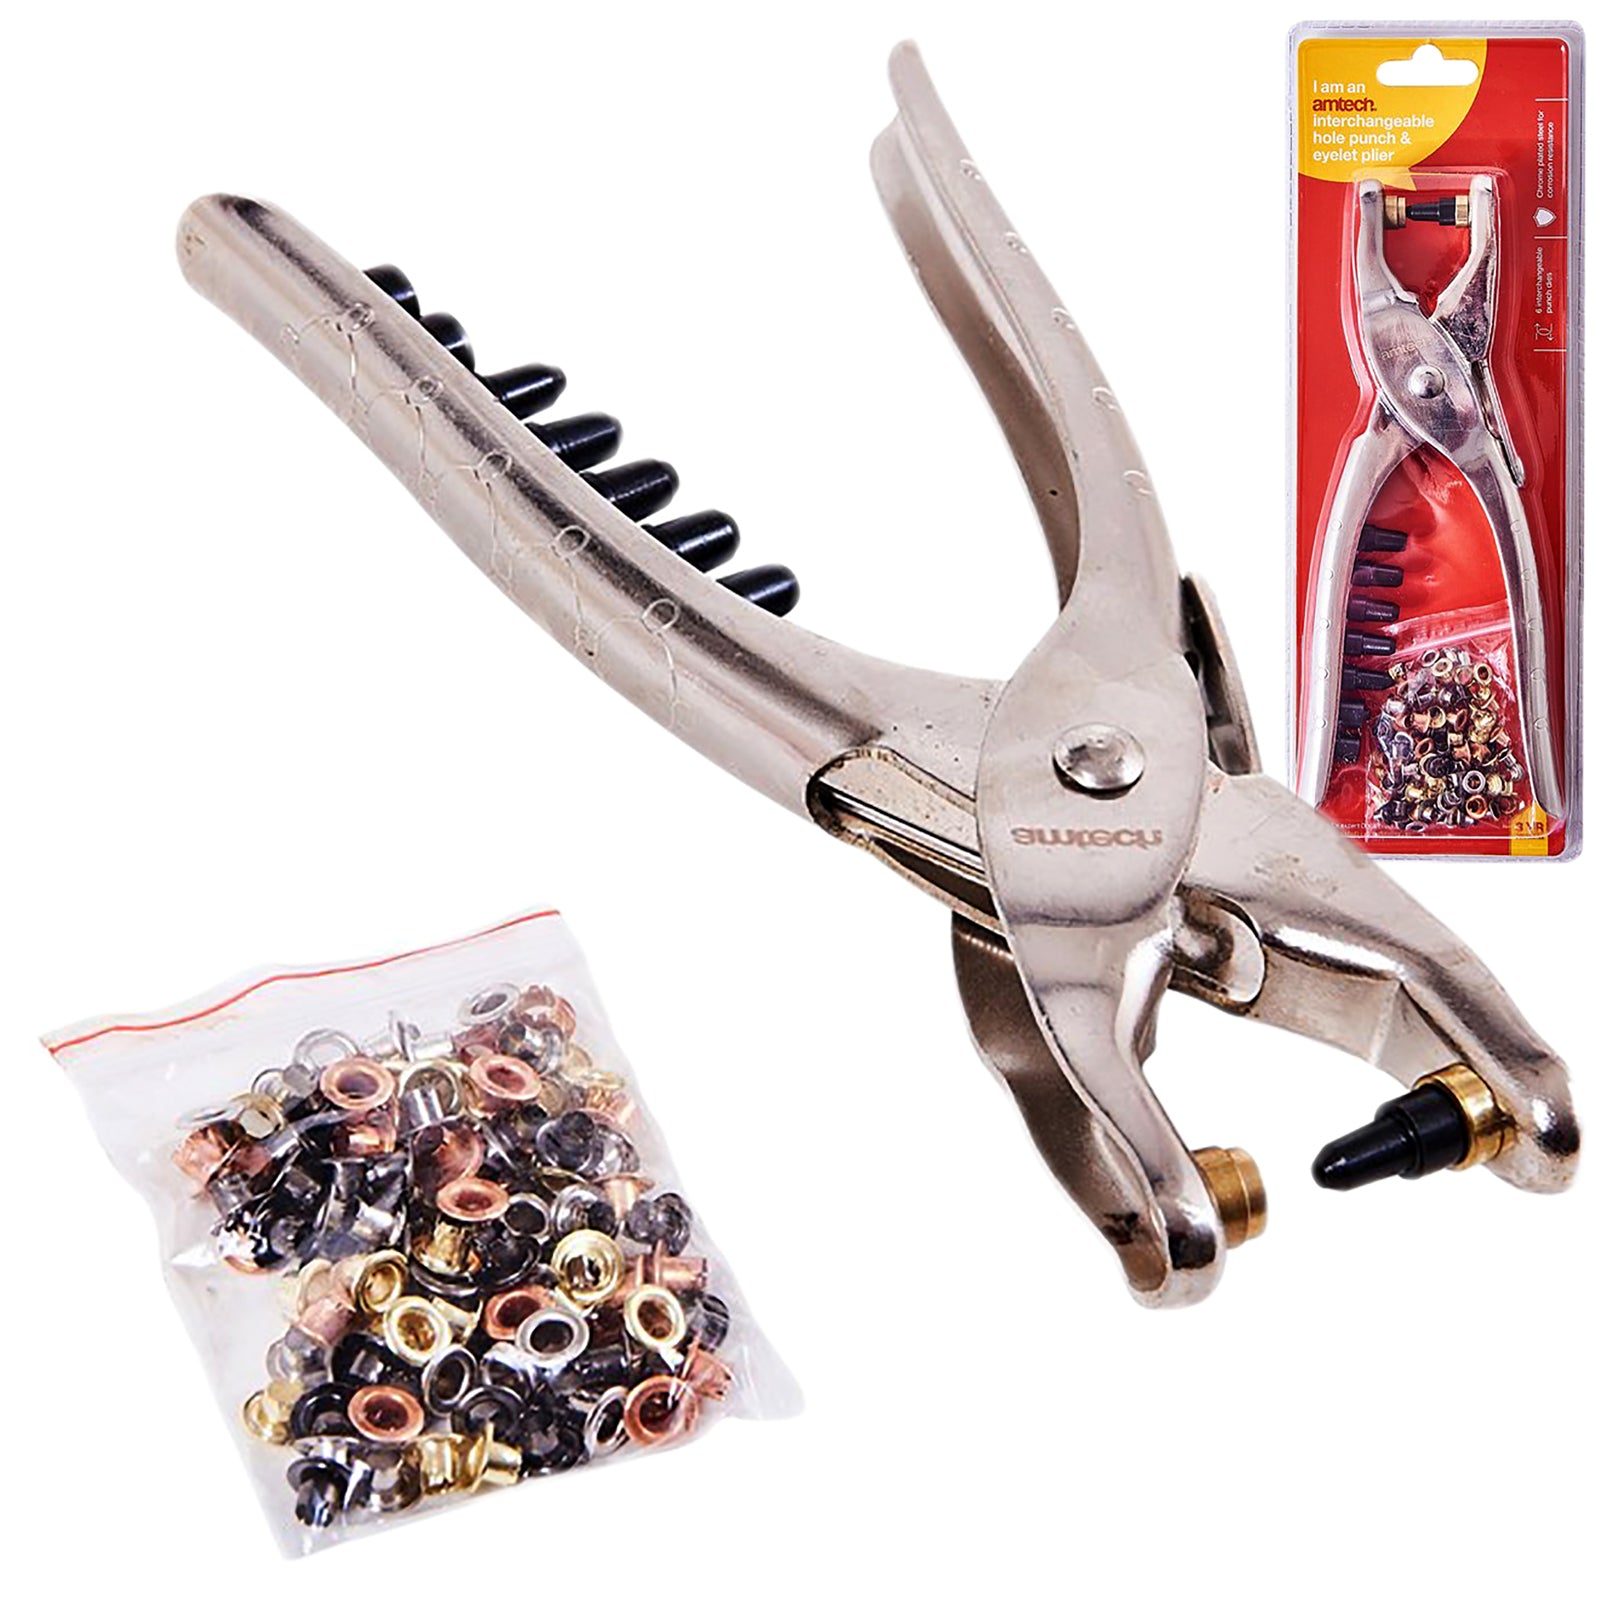 Amtech Interchangeable Hole Punch And Eyelet Pliers